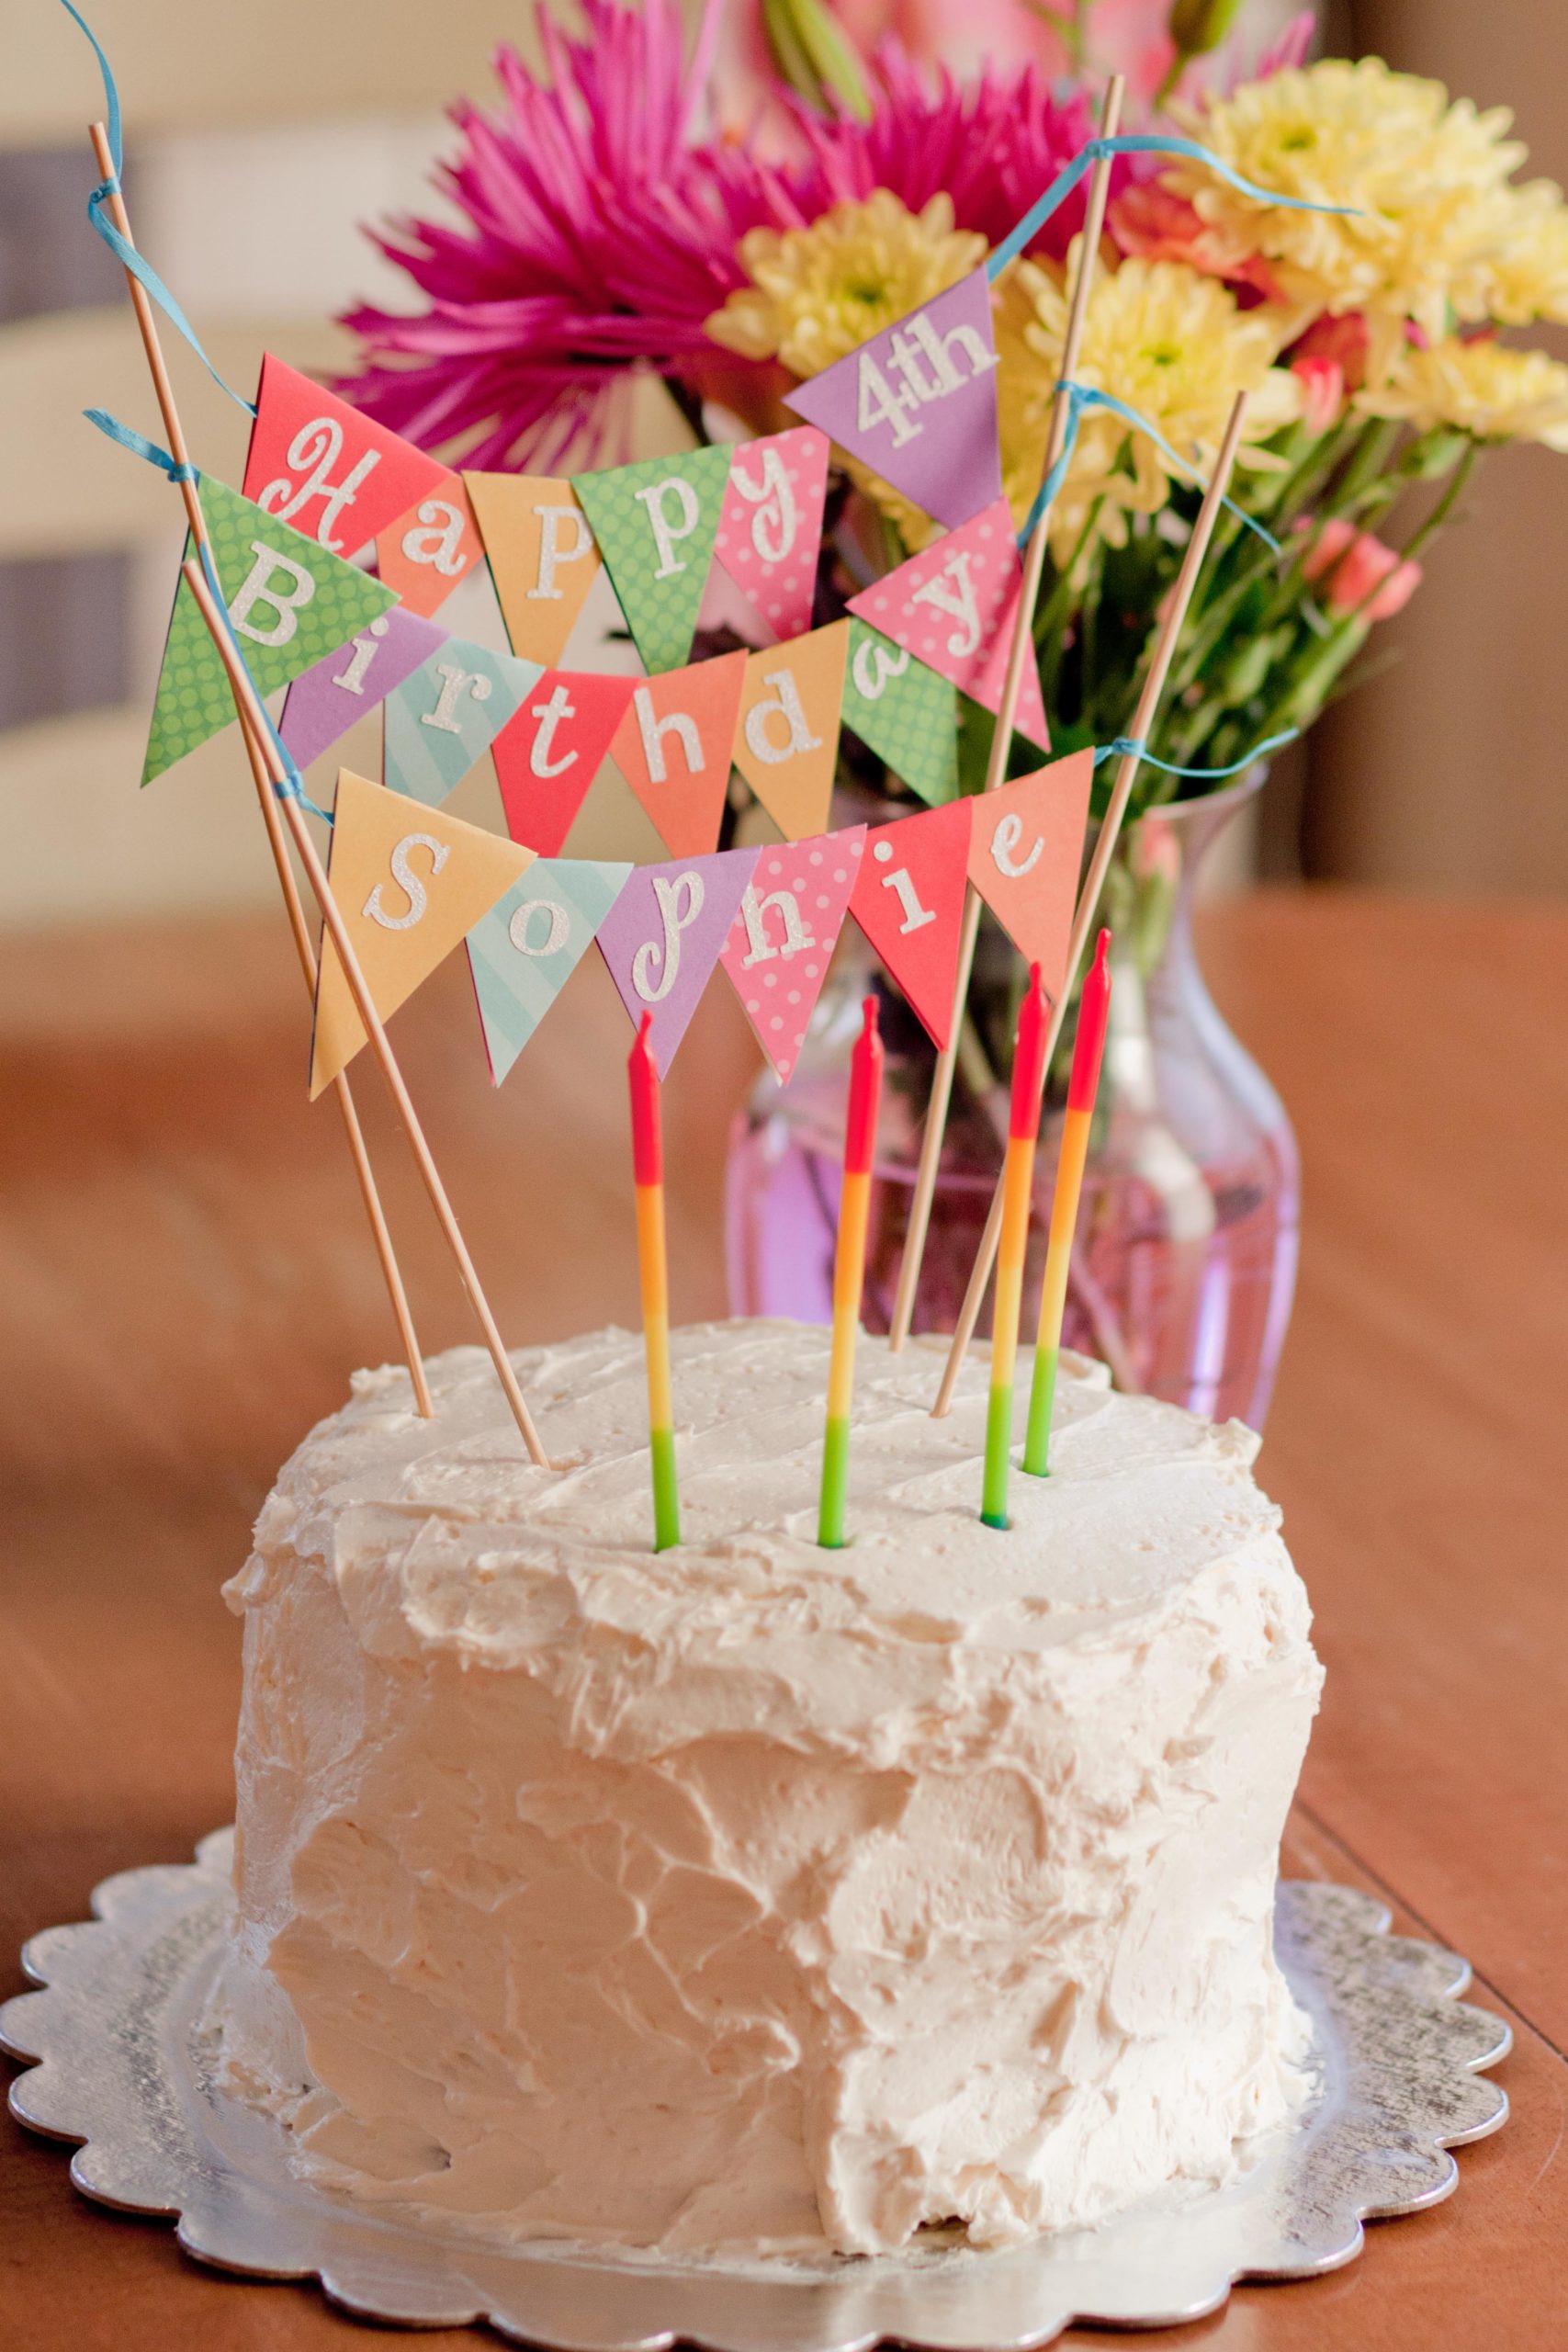 A birthday cake has a bunting cake topper that says "Happy 4th Birthday" in rainbow flags.